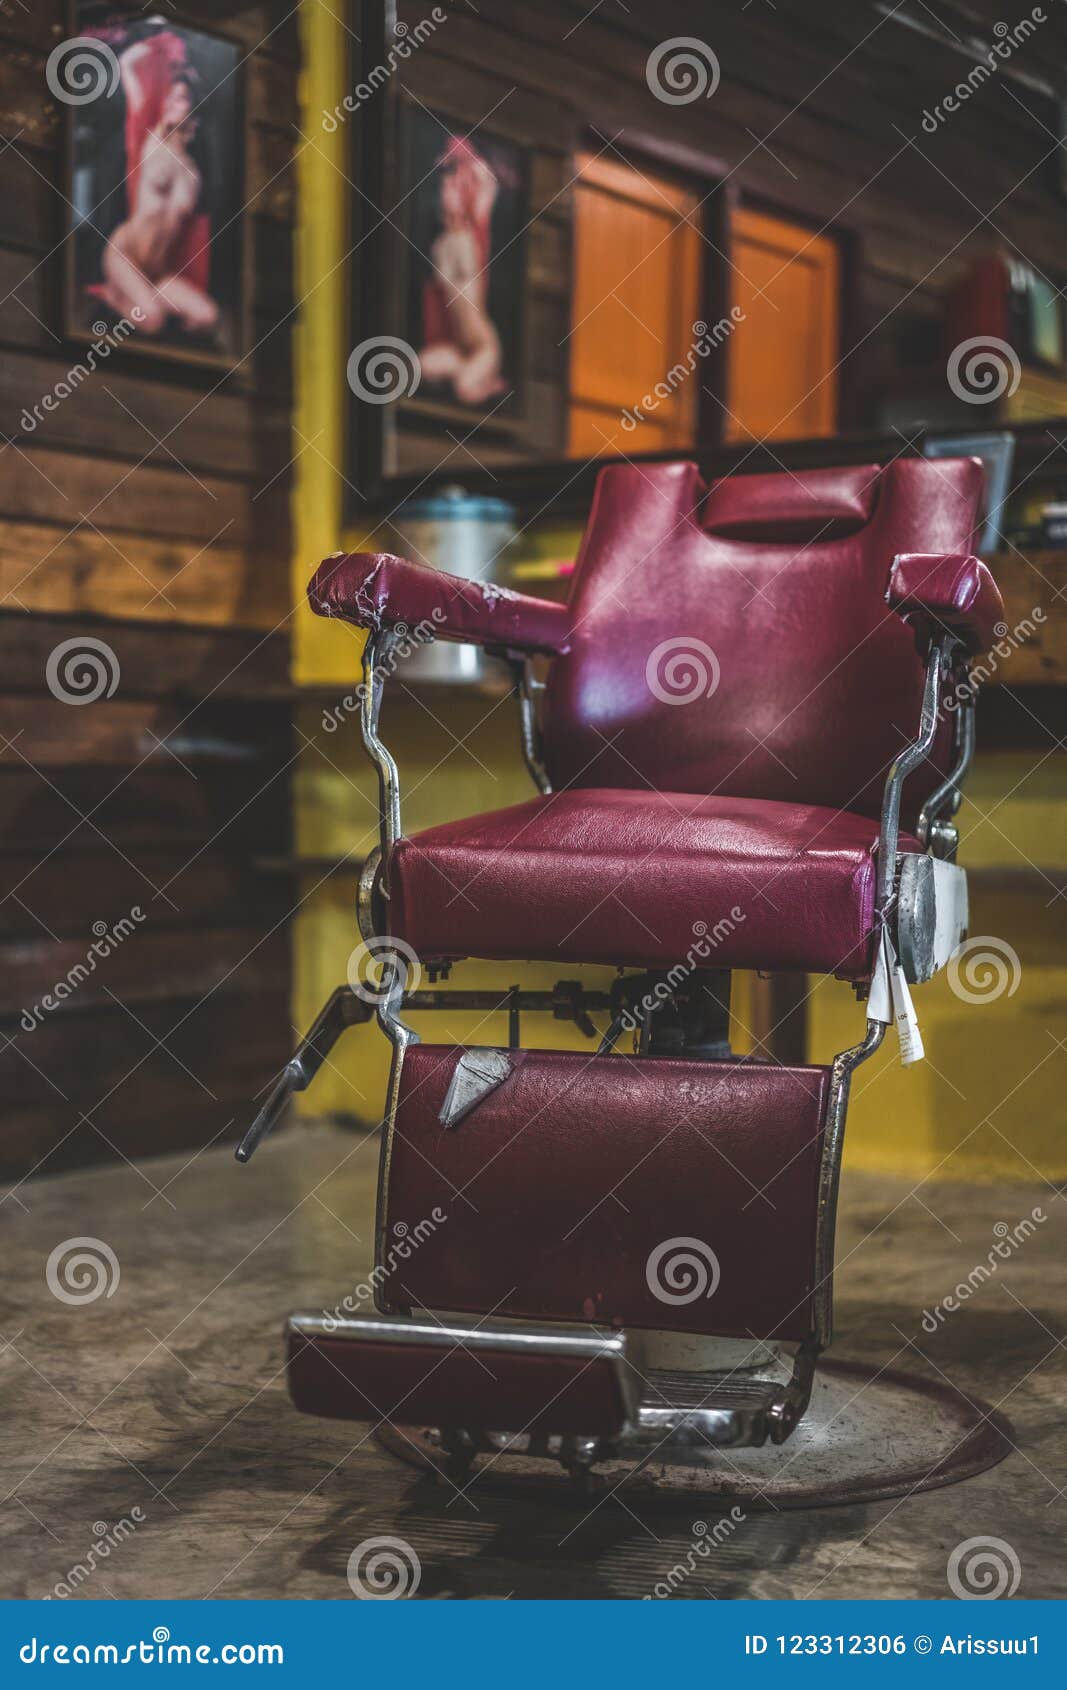 Vintage Salon Red Cushion Chair Stock Photo Image of